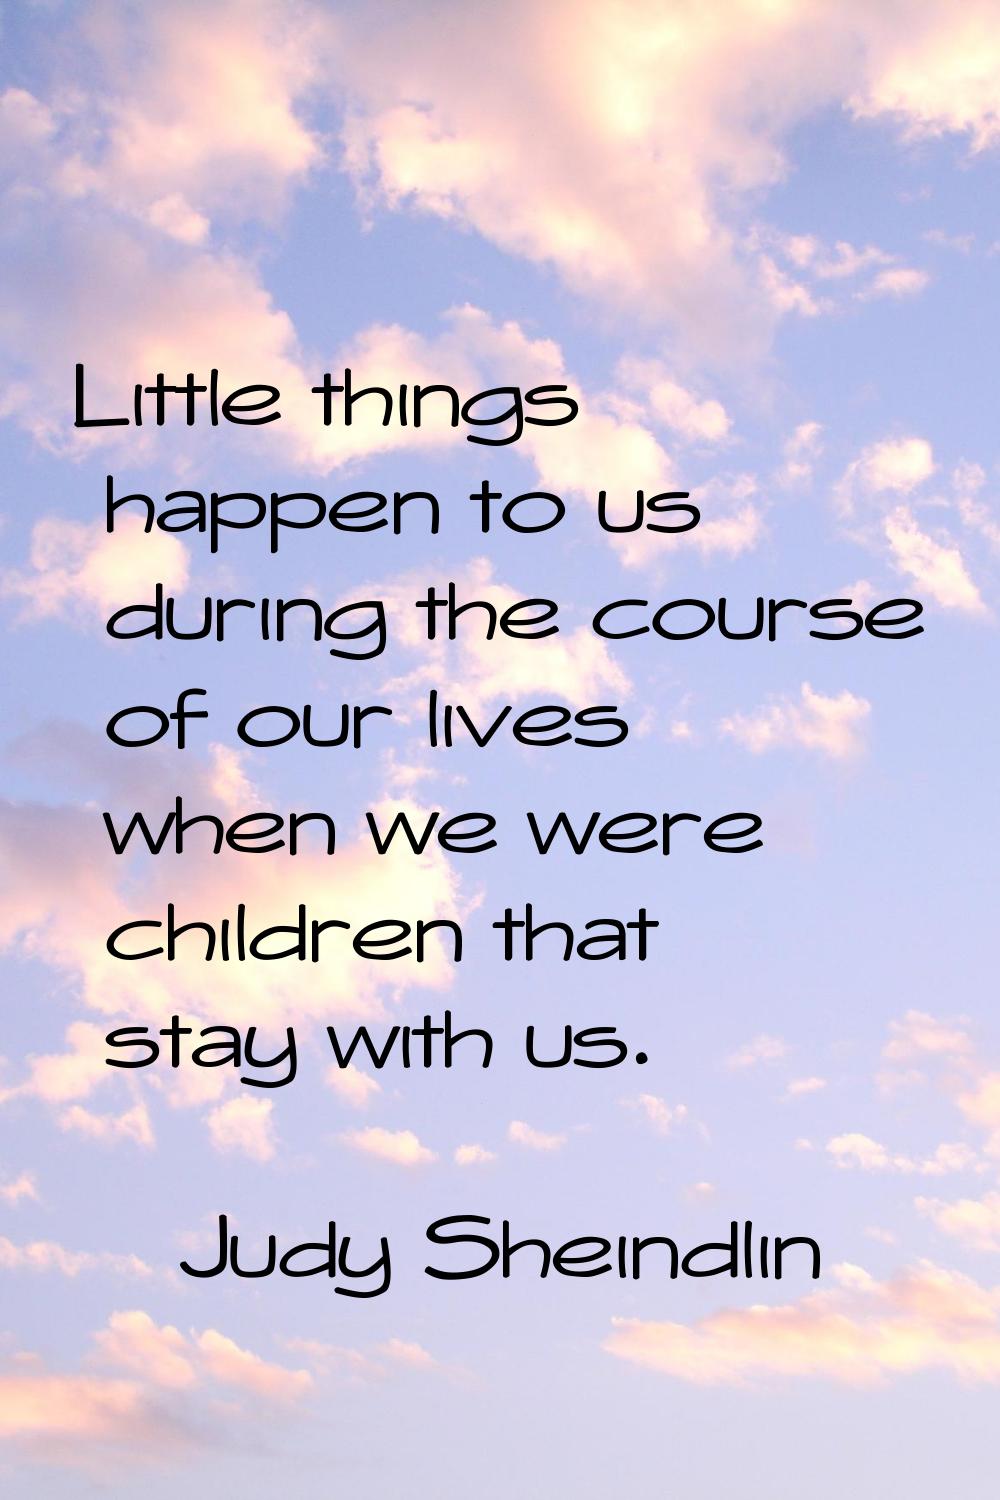 Little things happen to us during the course of our lives when we were children that stay with us.